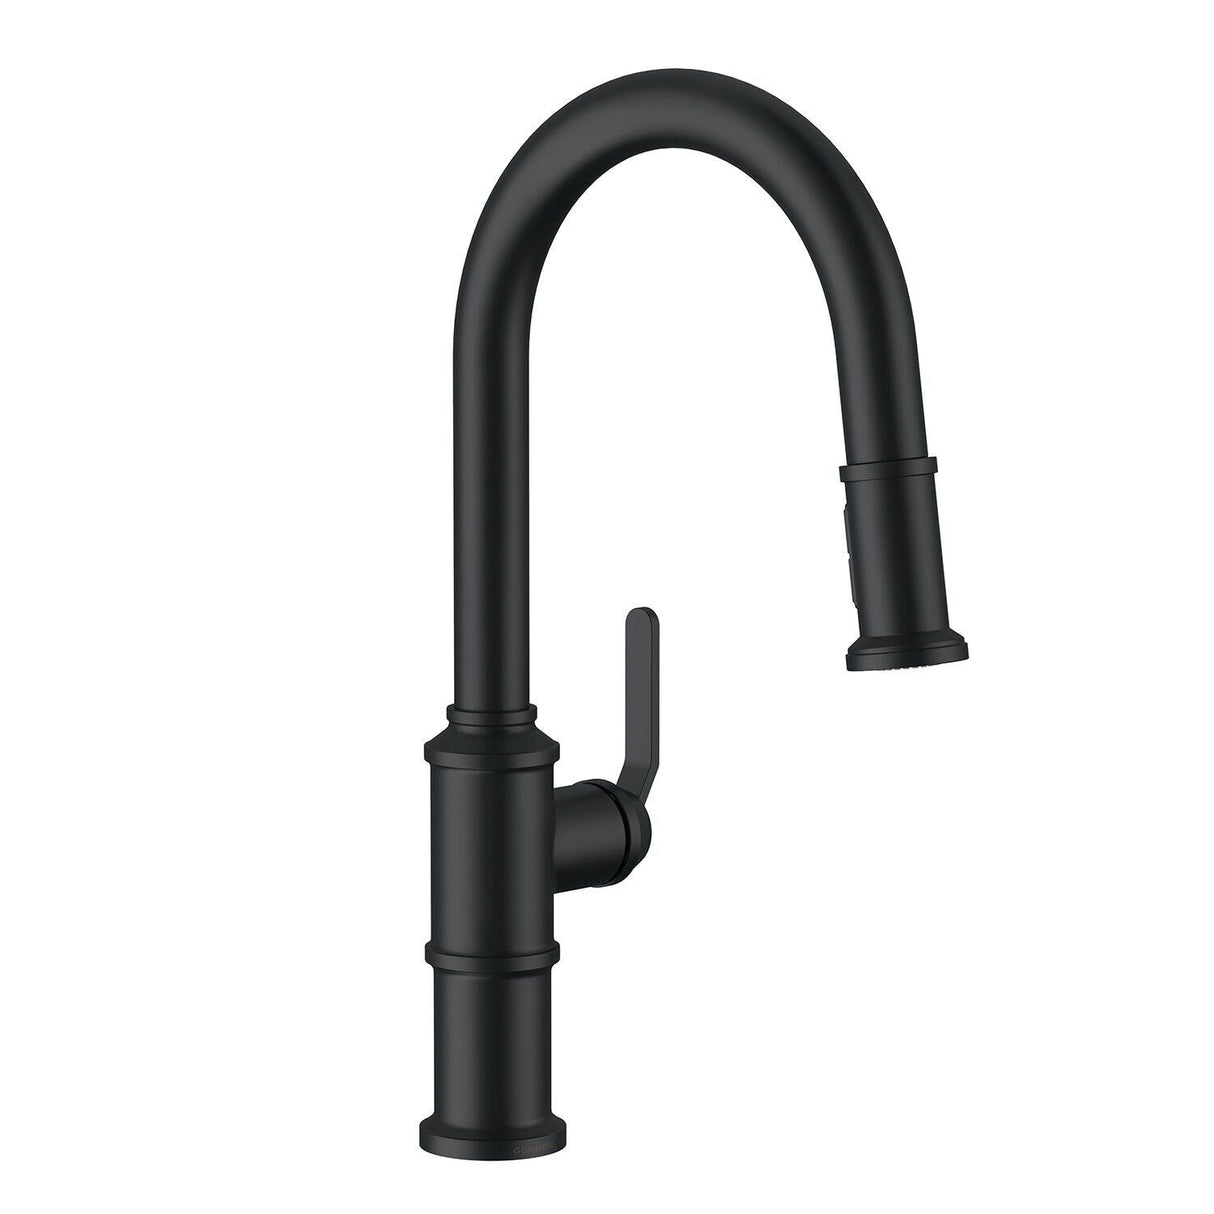 Gerber D454437SS Stainless Steel Kinzie Single Handle Pull-down Kitchen Faucet